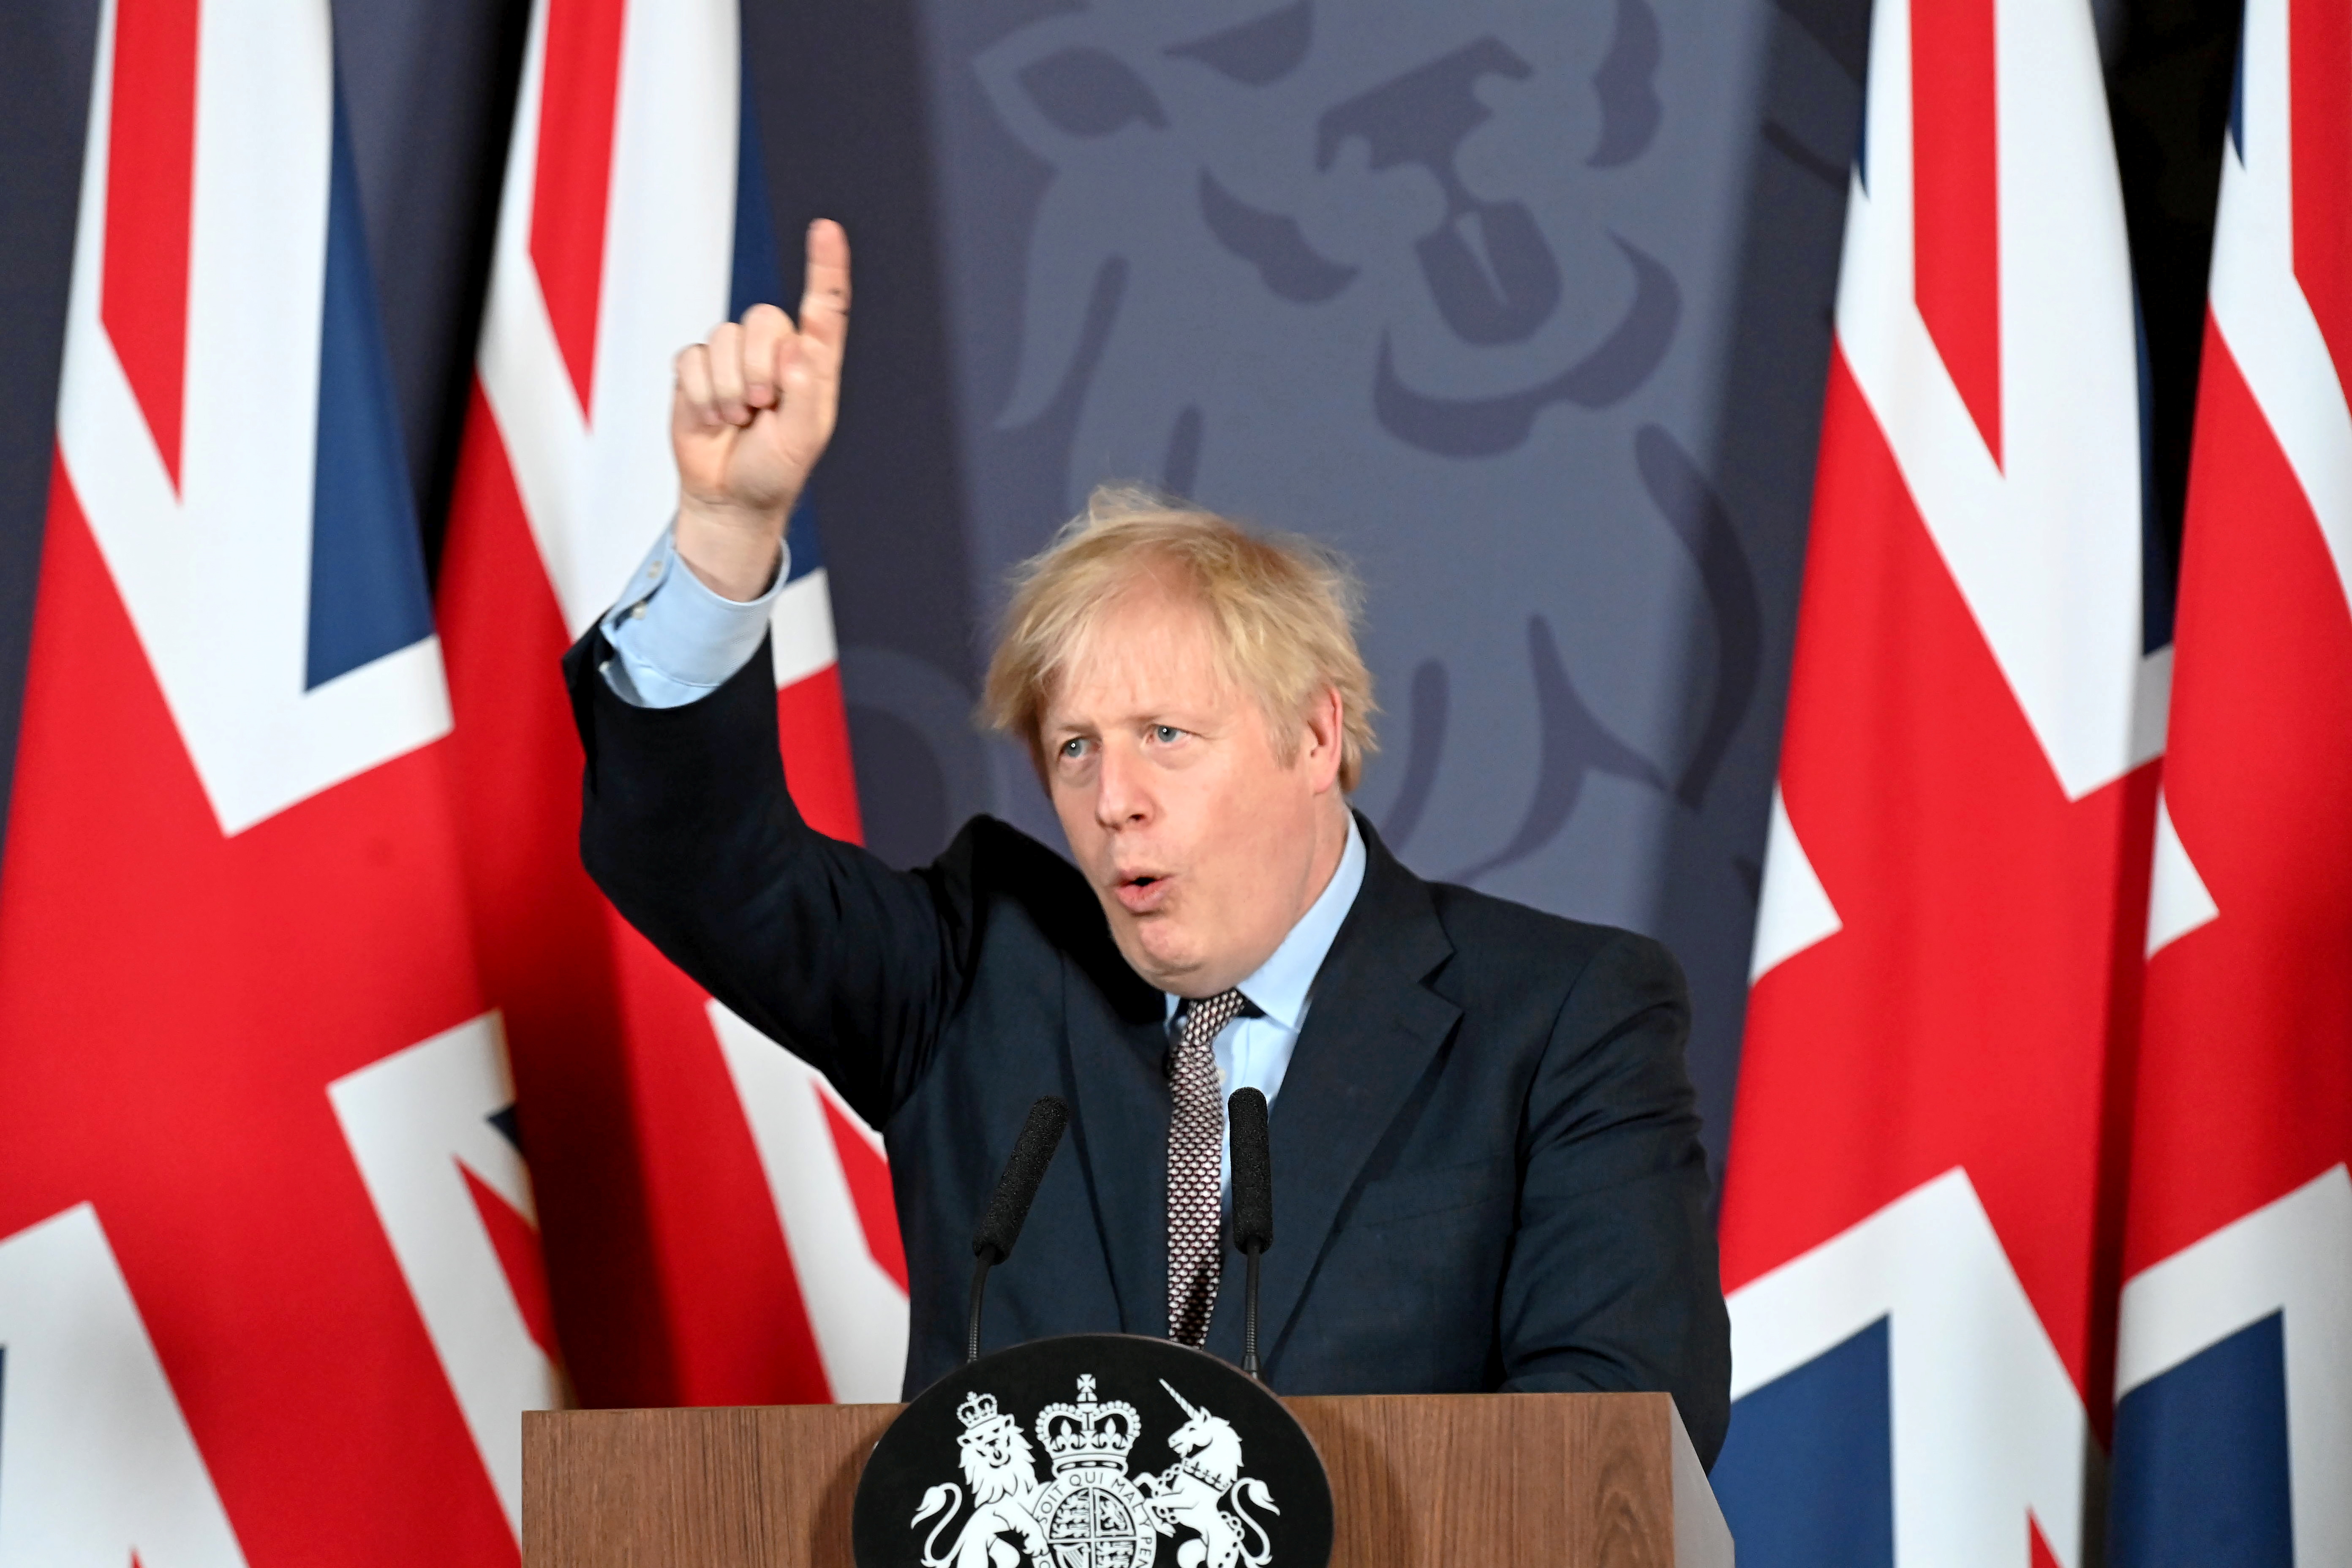 British Prime Minister Boris Johnson holds a news conference in Downing Street on the outcome of the Brexit negotiations, in London, Britain December 24, 2020. Paul Grover /Pool via REUTERS